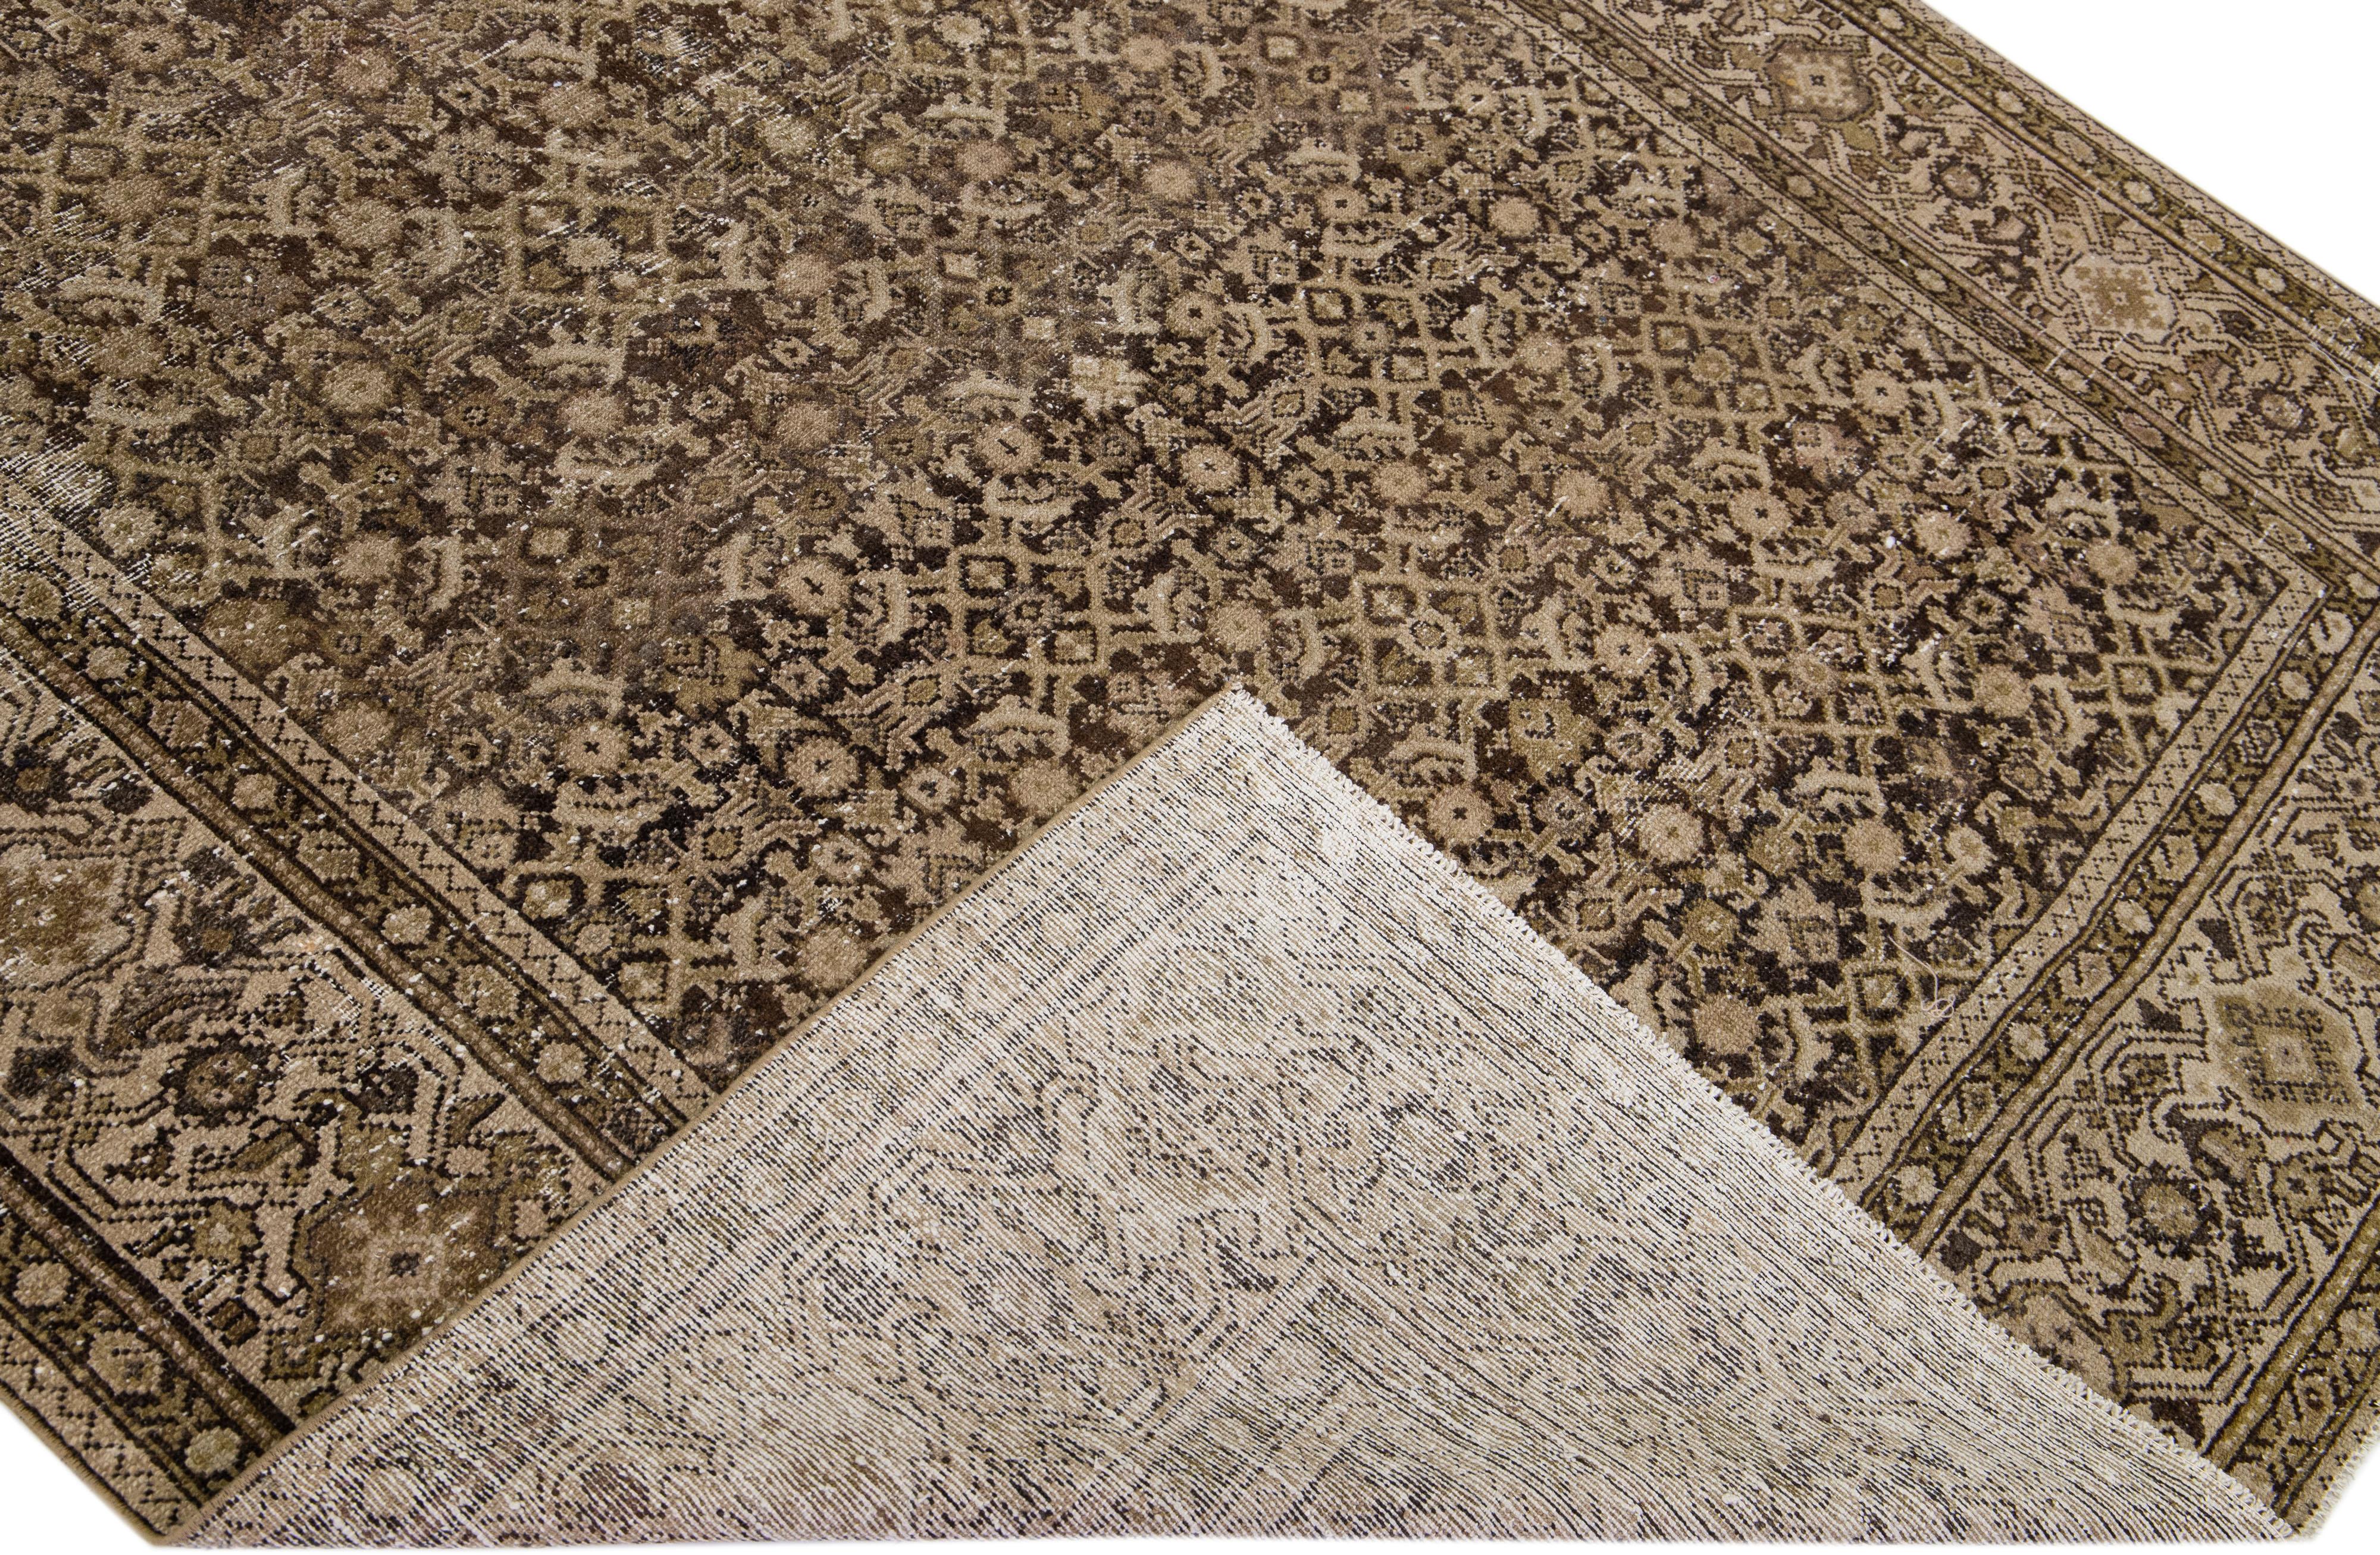 Beautiful antique Malayer hand-knotted wool rug with a brown color field. This Malayer piece has a designed frame with beige, red, and green accents in a gorgeous all-over geometric pattern design.

This rug measures: 6'3